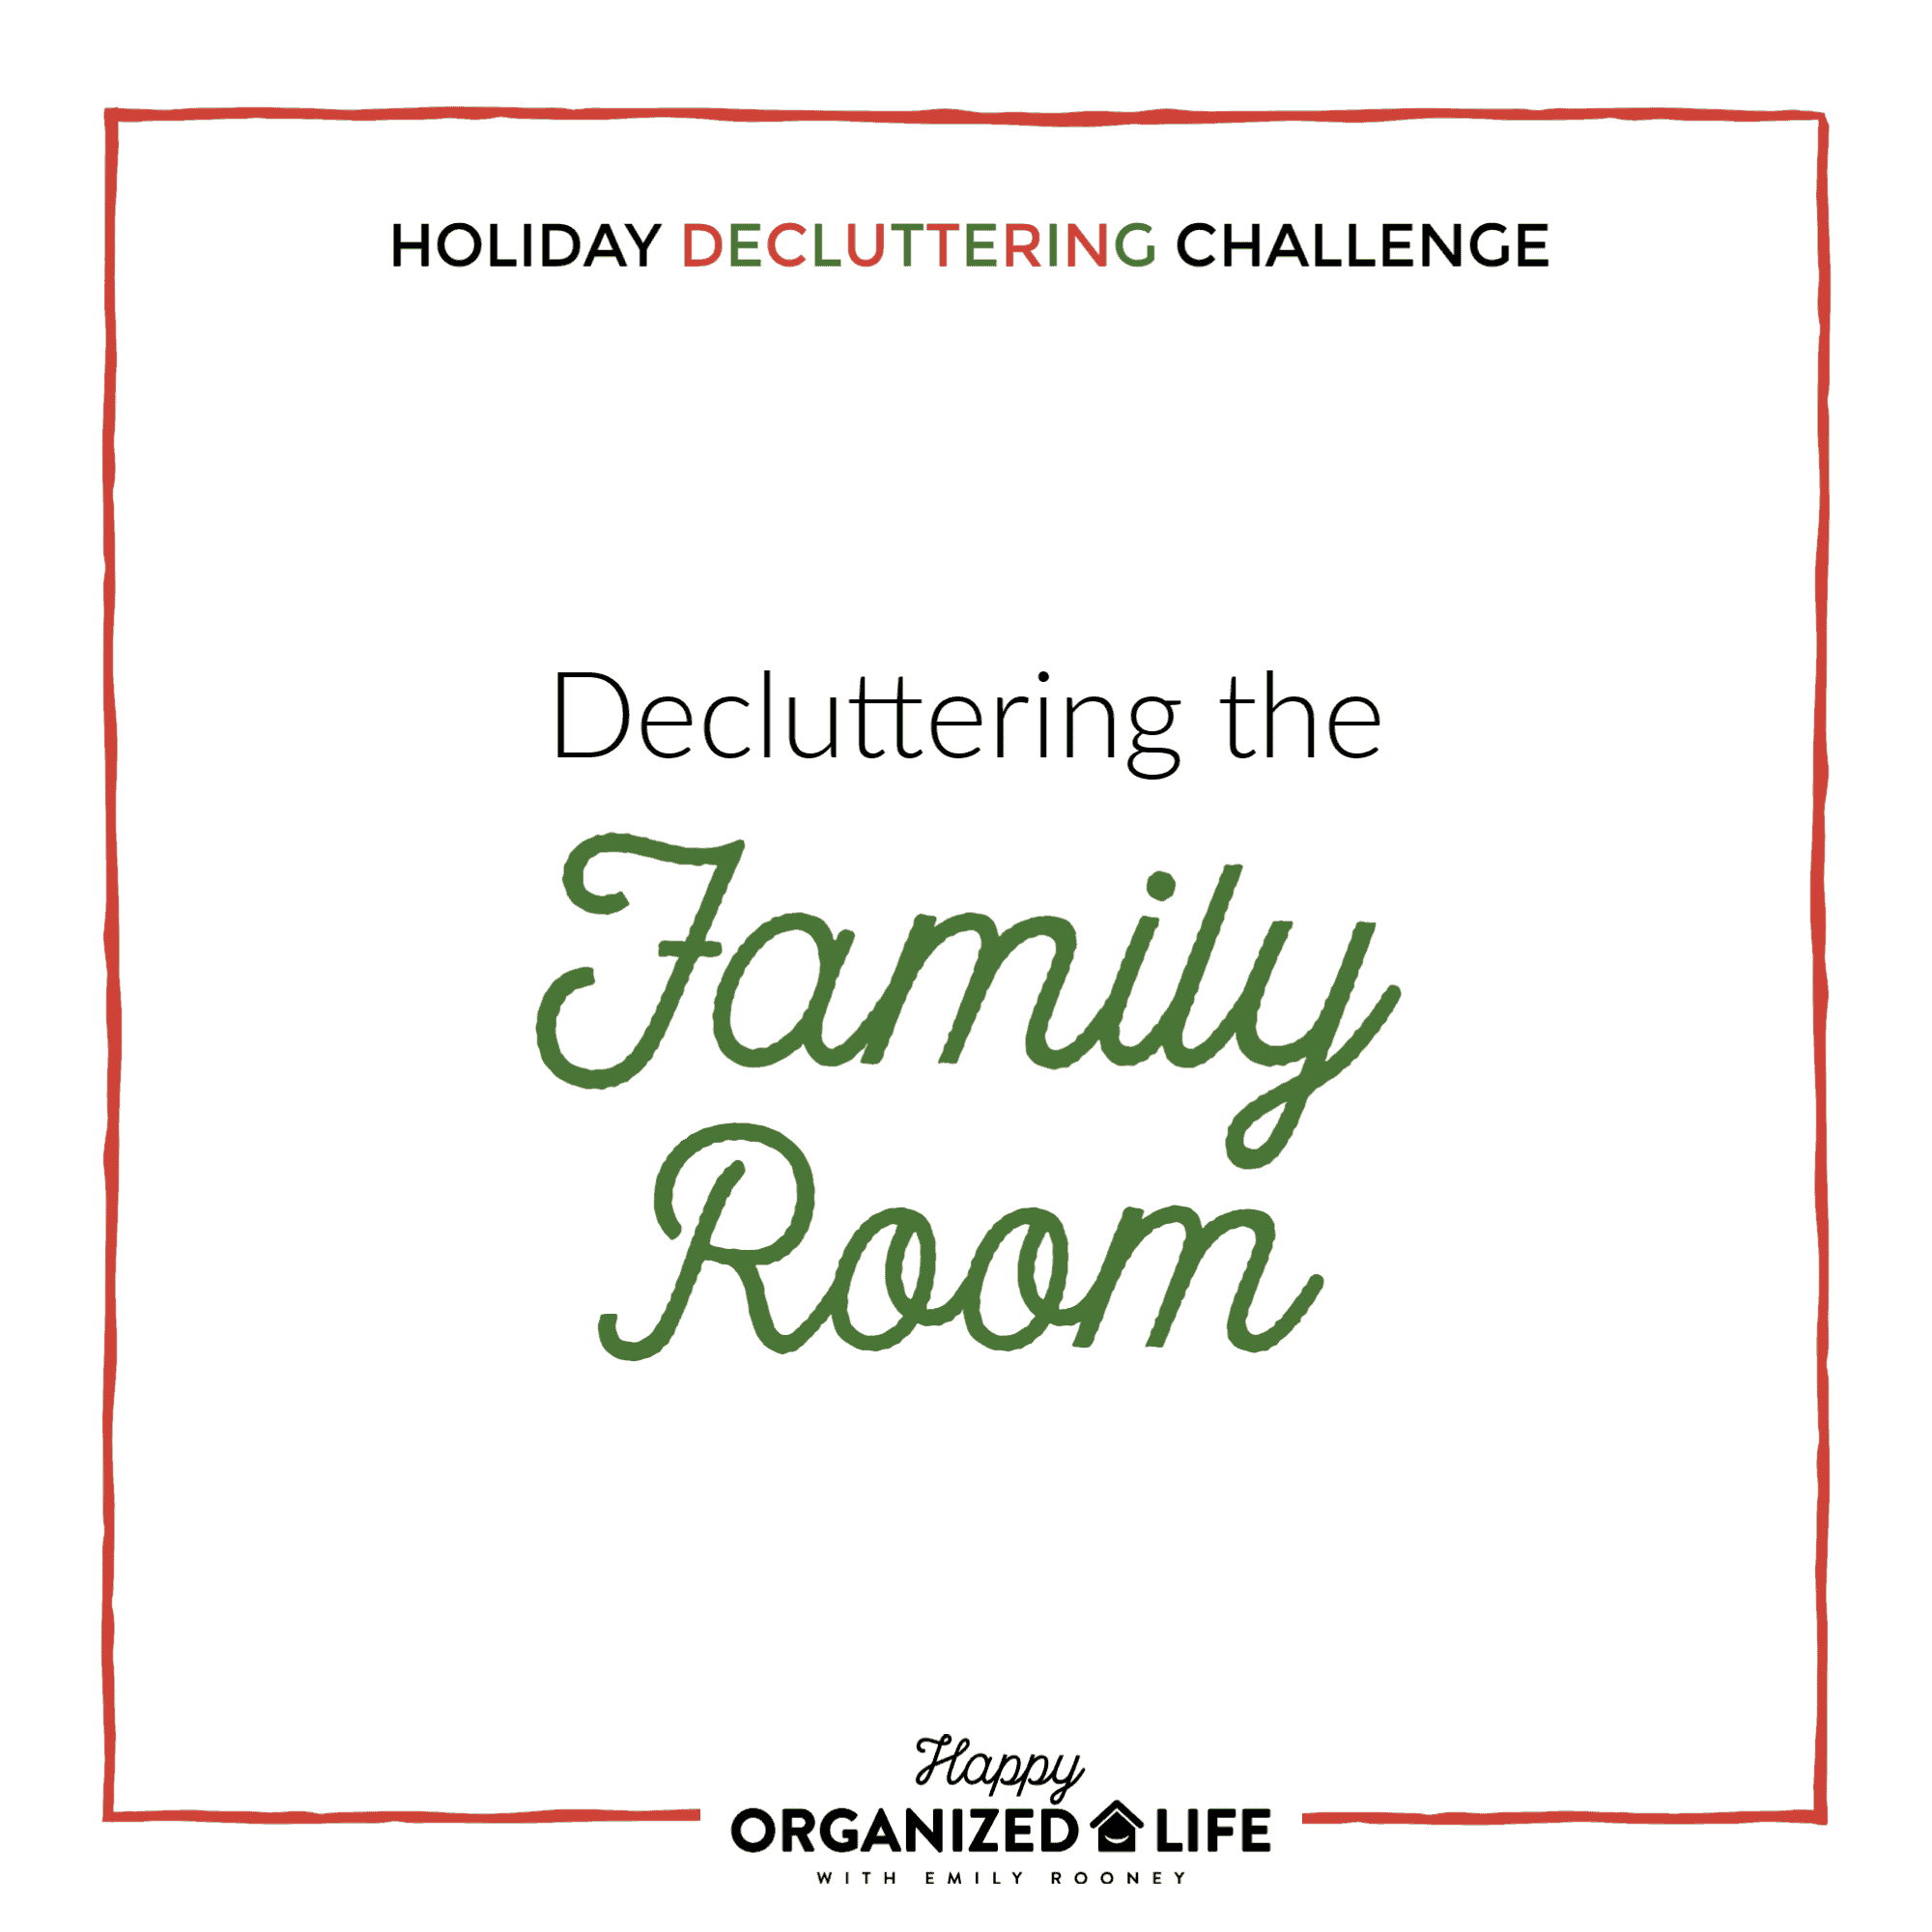 It's hard to relax in a messy space, which is why we're going to declutter our family rooms! Follow these simply steps to rid your family room of clutter and start loving your home again.